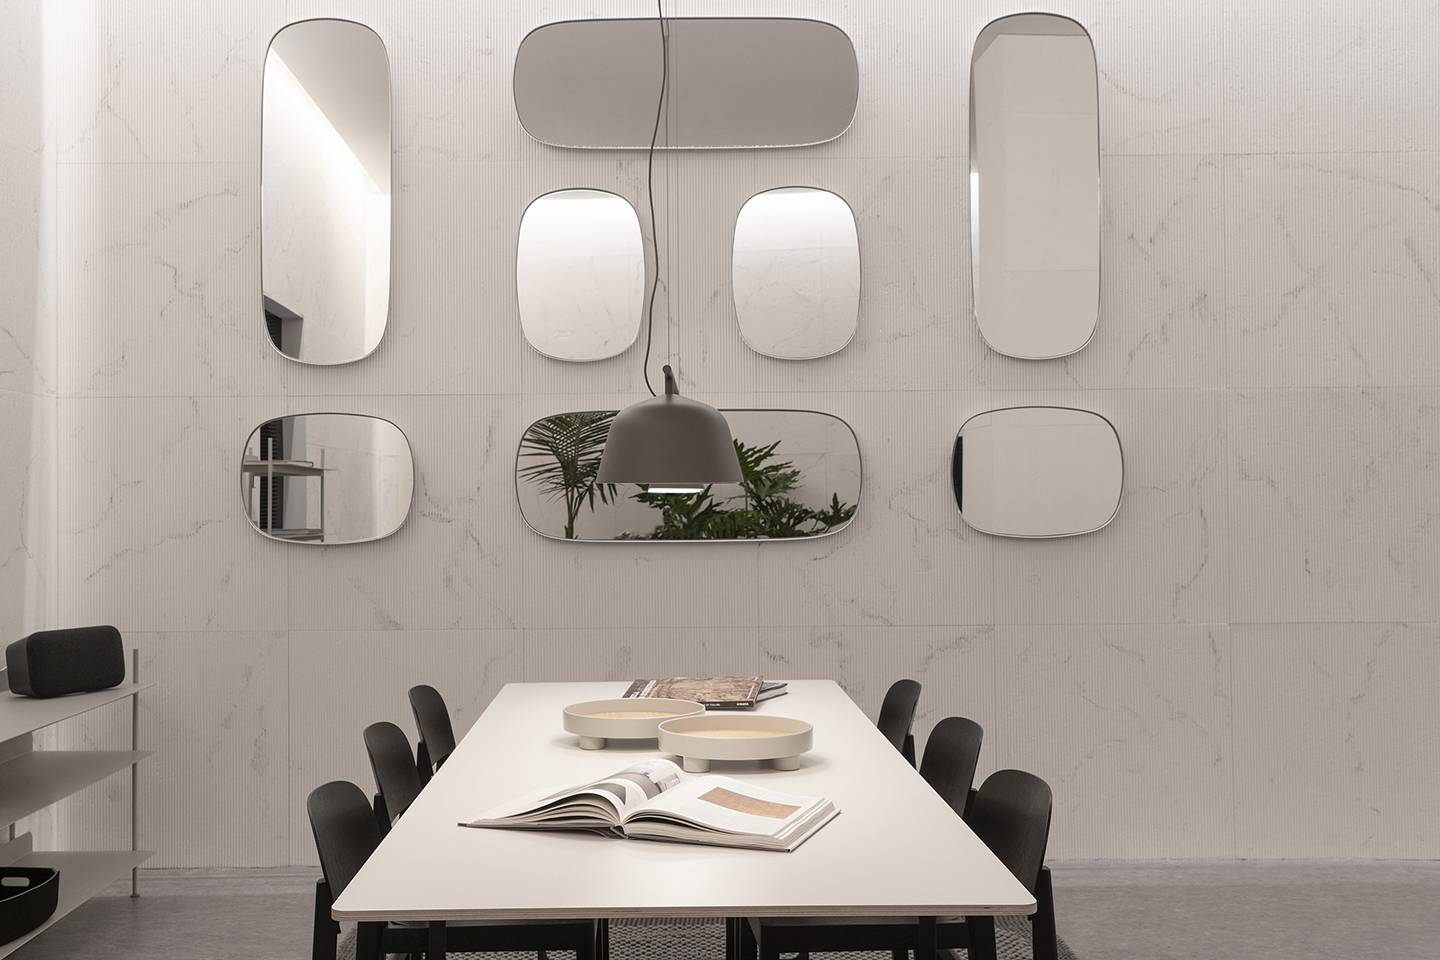 A dining room with natural marble walls, round mirrors, and sleek furniture